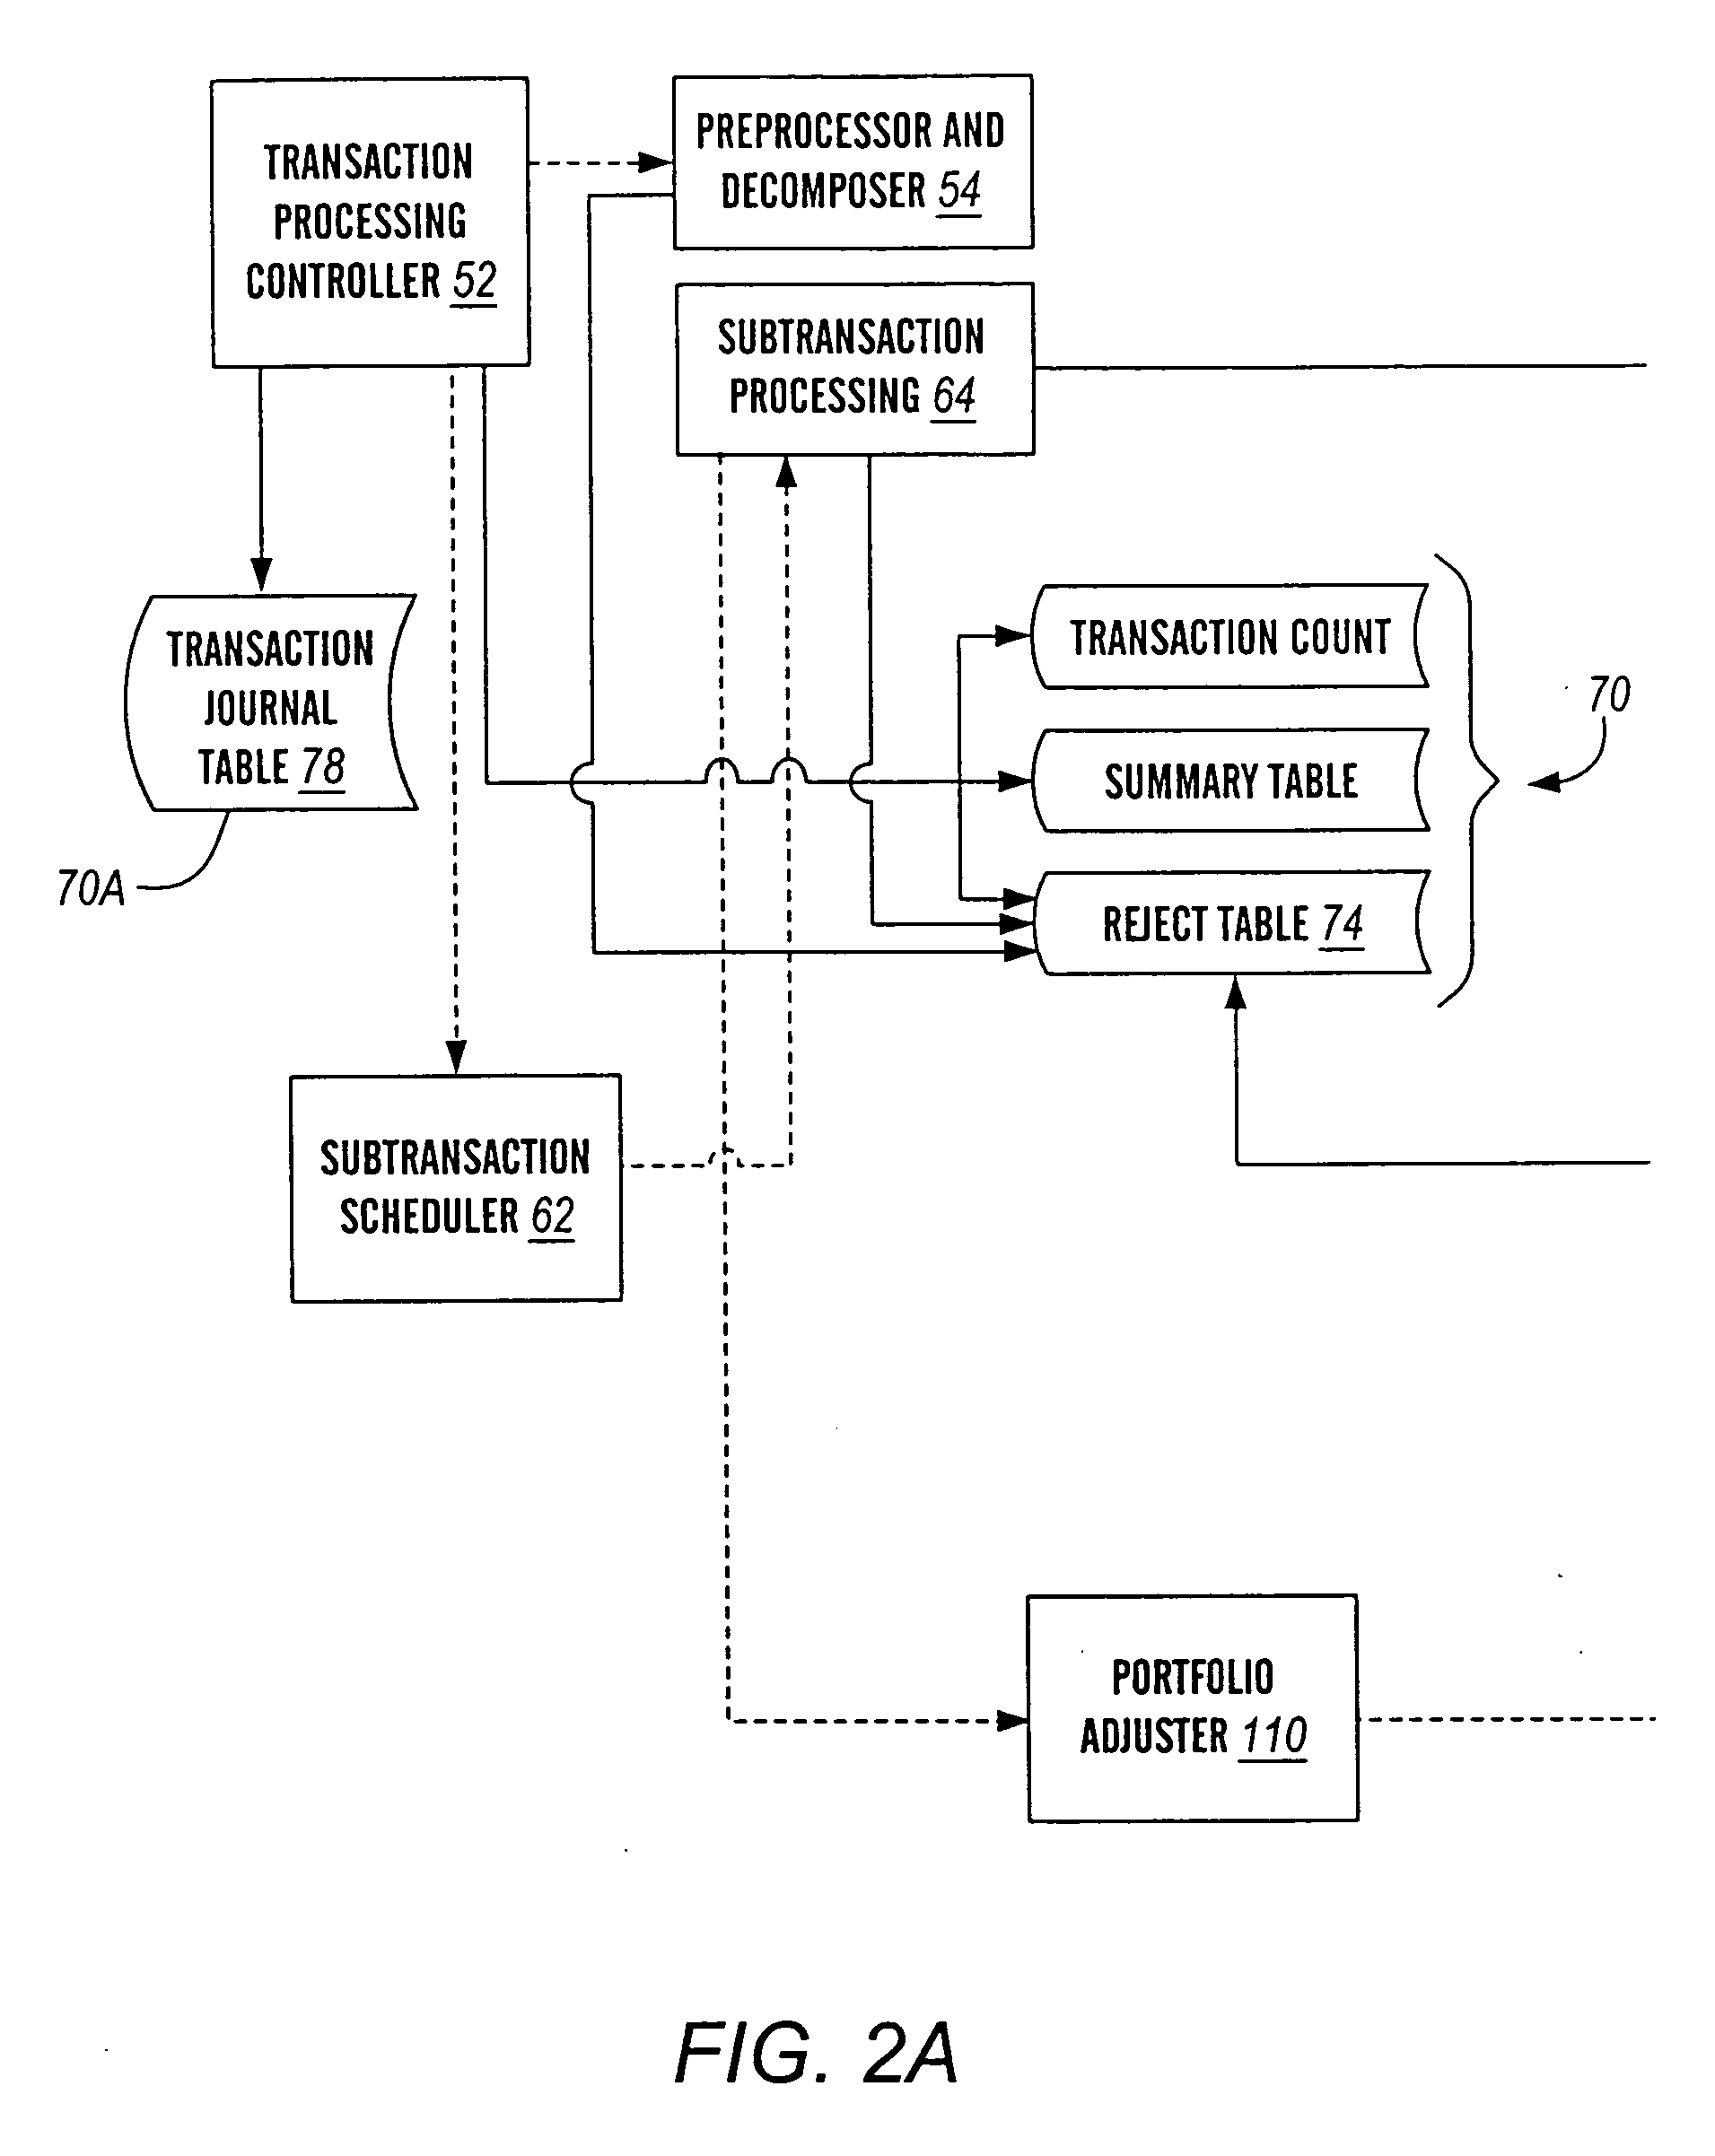 Multi-processing financial transaction processing system